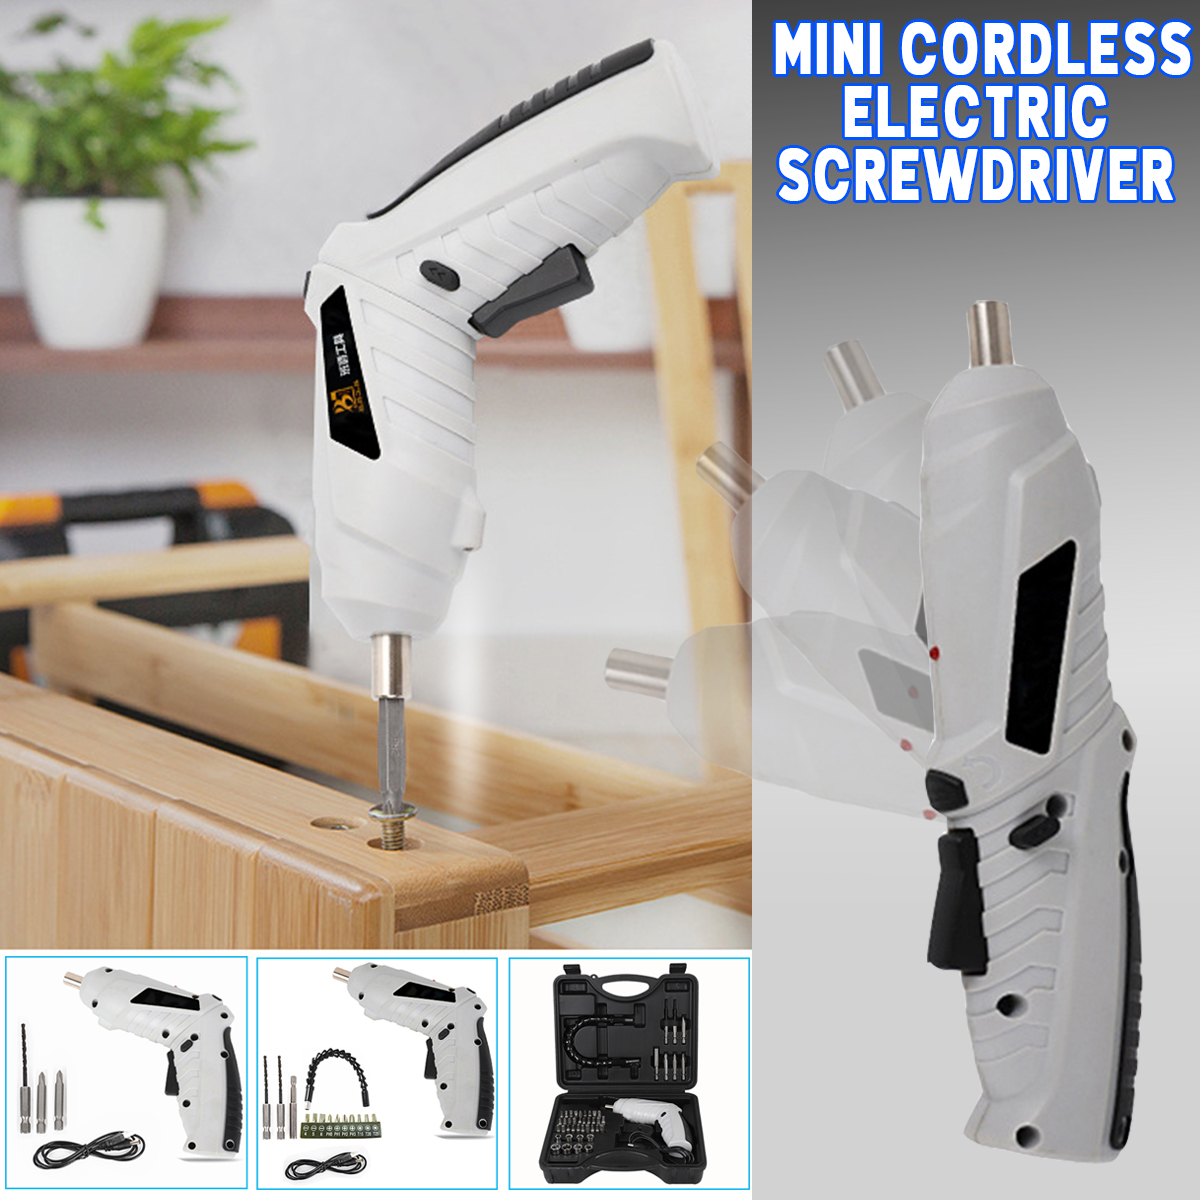 Mini Cordless Electric Screwdriver Set USB Rechargeable Drill Driver With Work Light 65